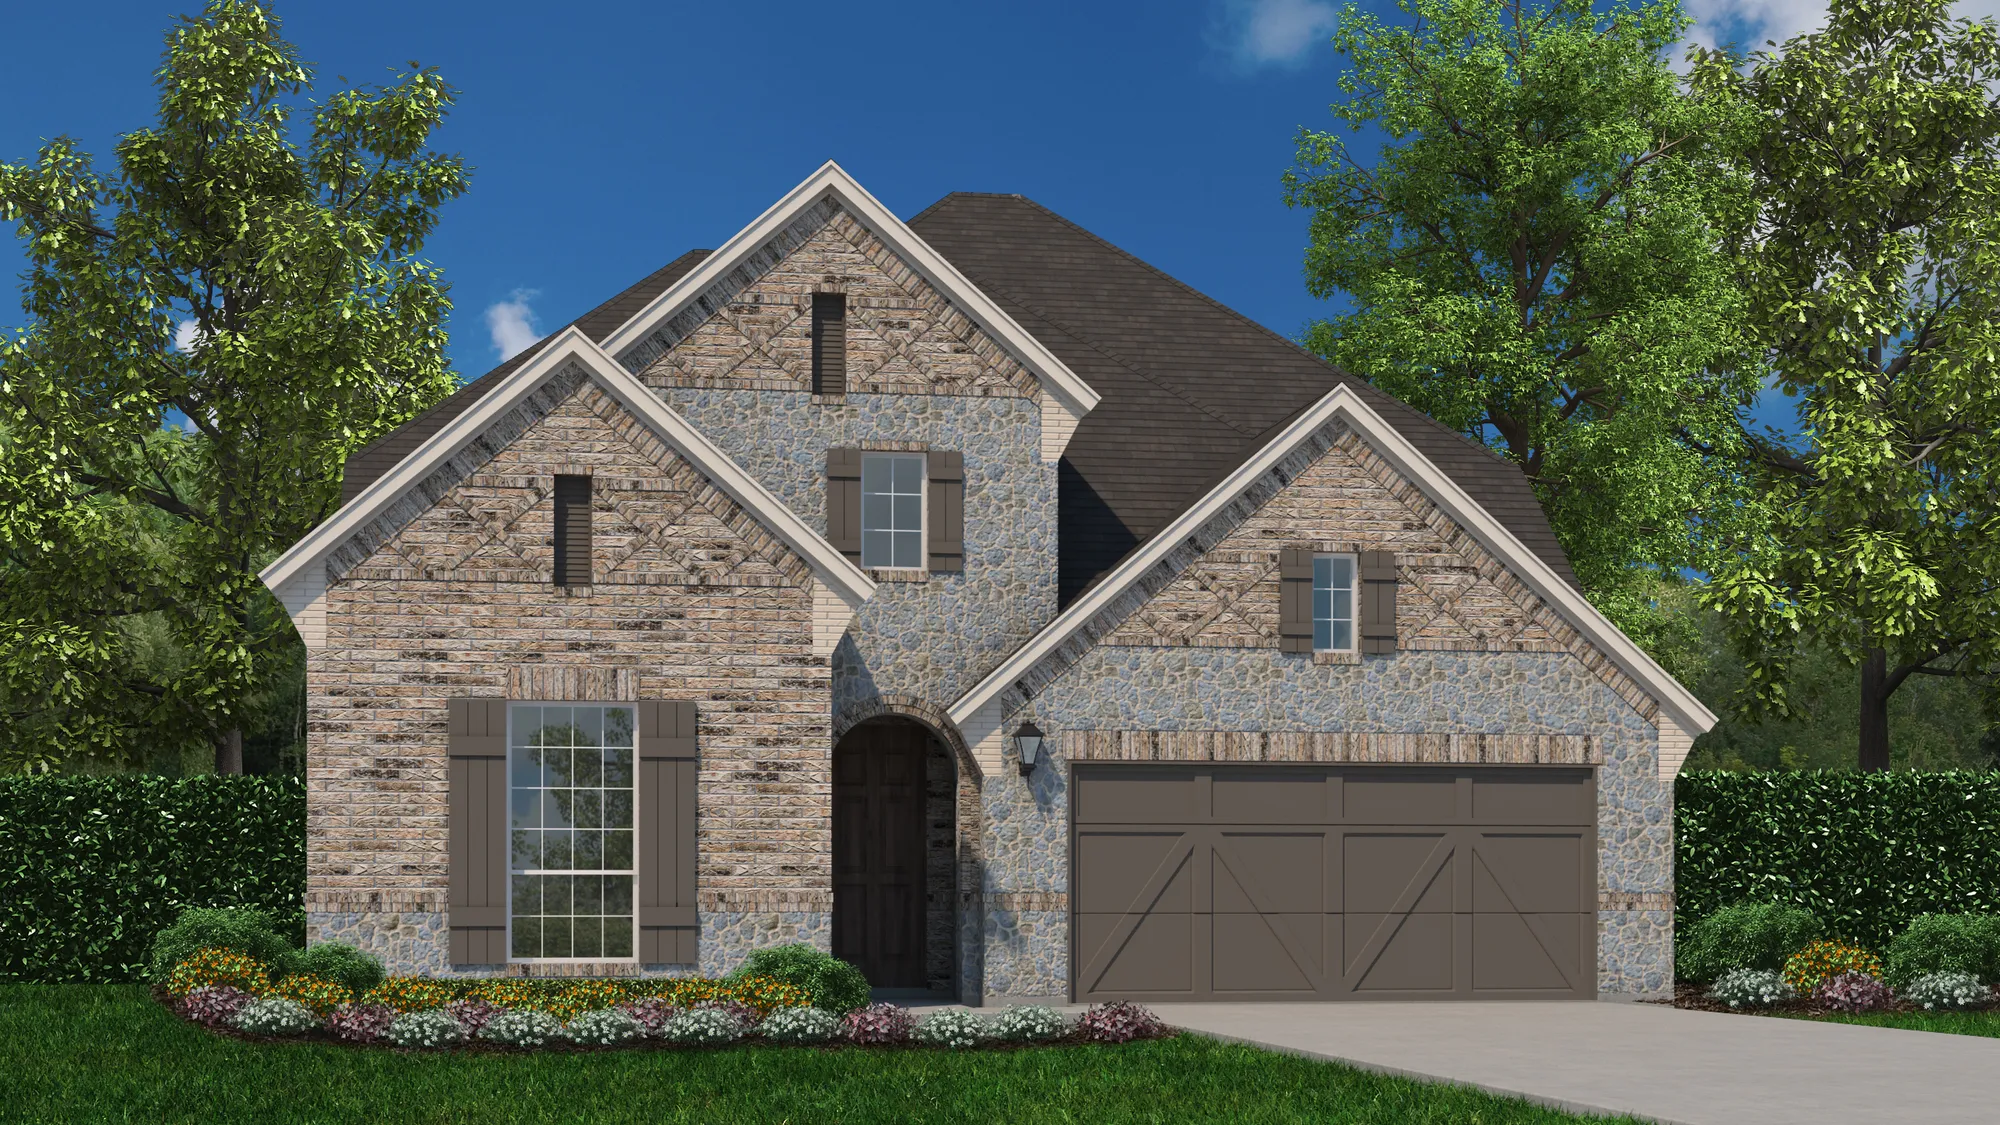 Plan 1156 Elevation C with Stone